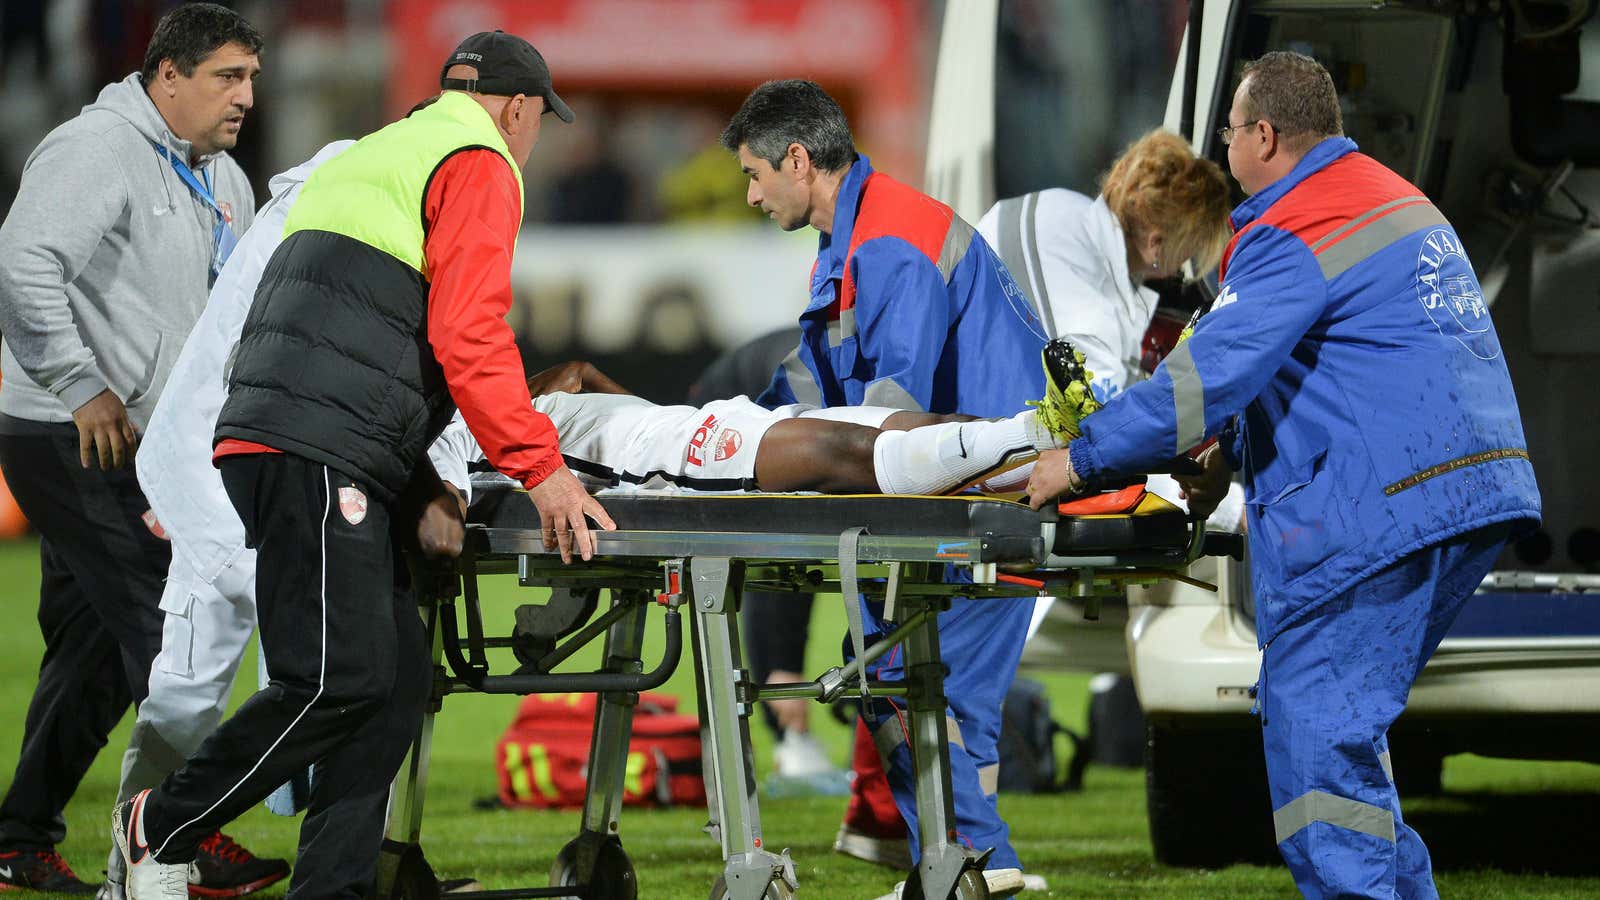 Ekeng collapsed minutes after coming on as a substitute player.